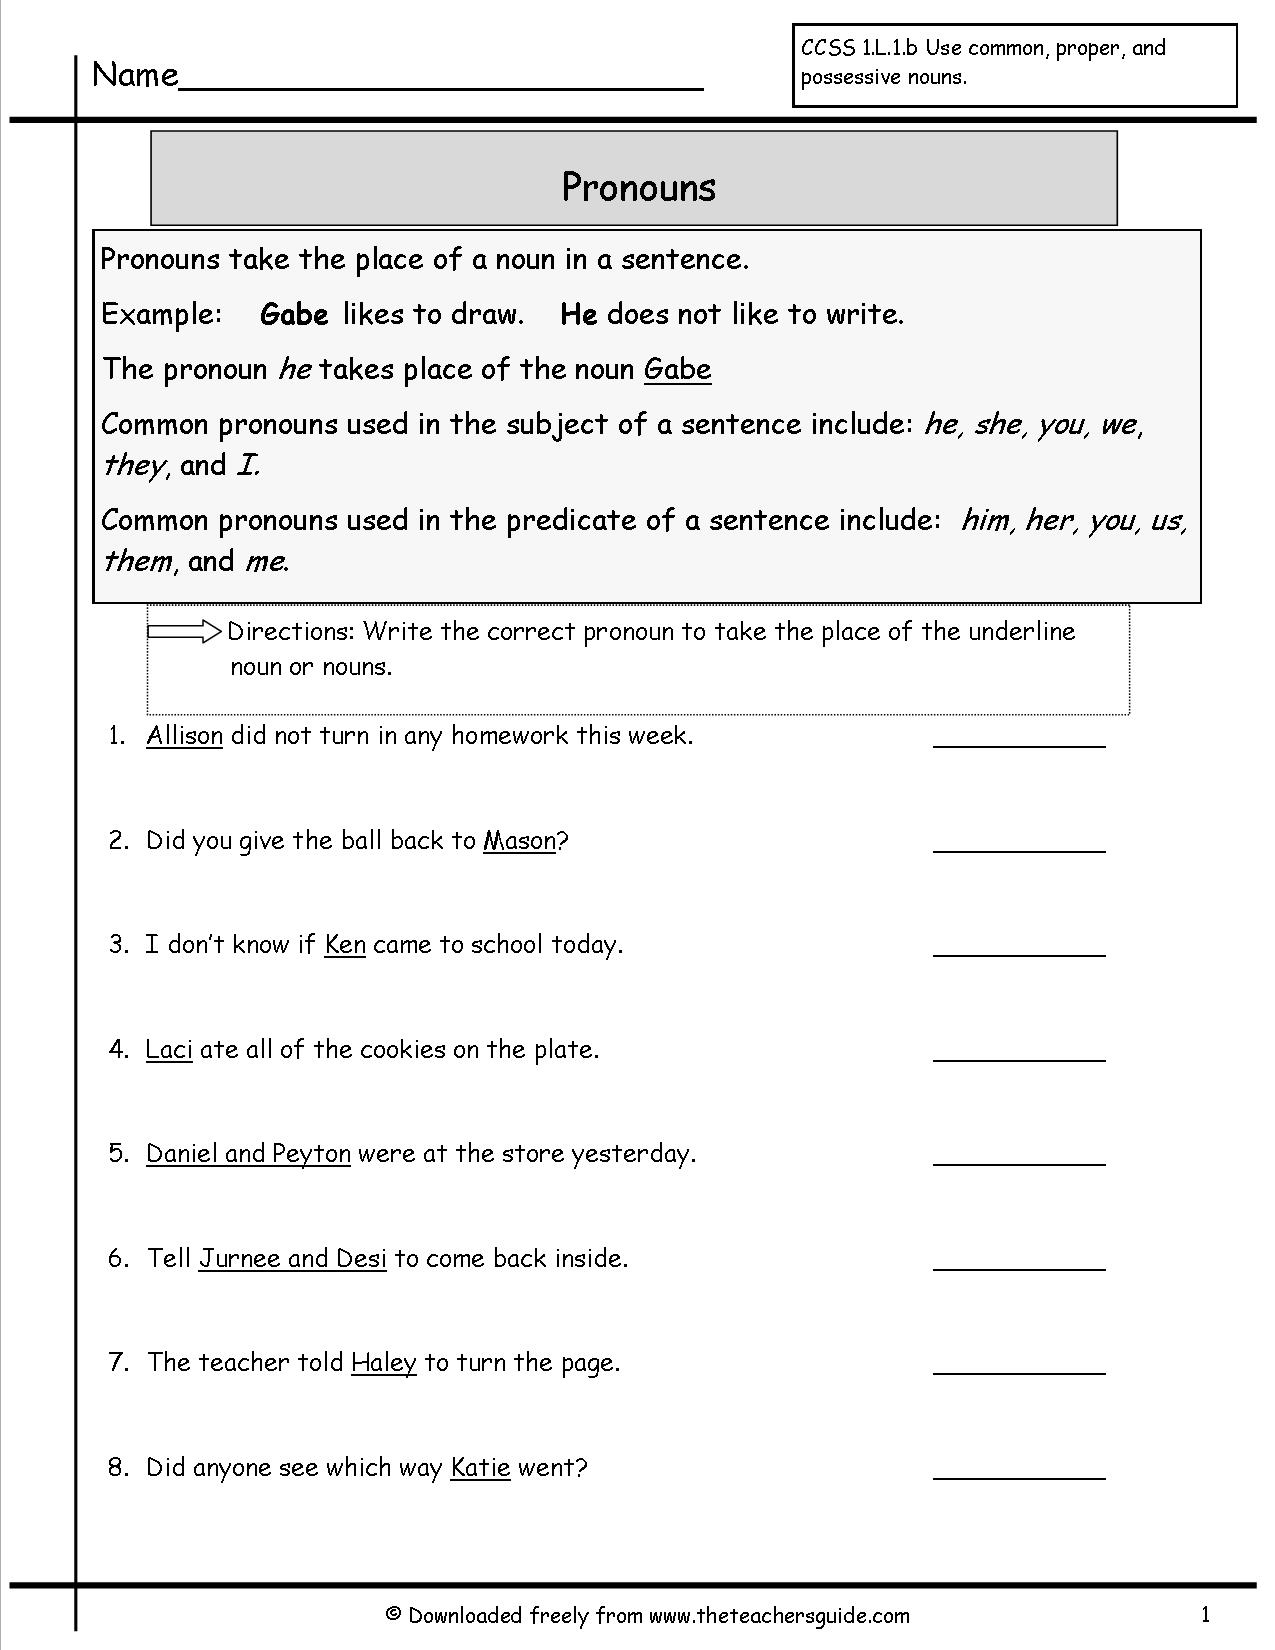 Worksheets For Pronouns The Best Worksheets Image Collection